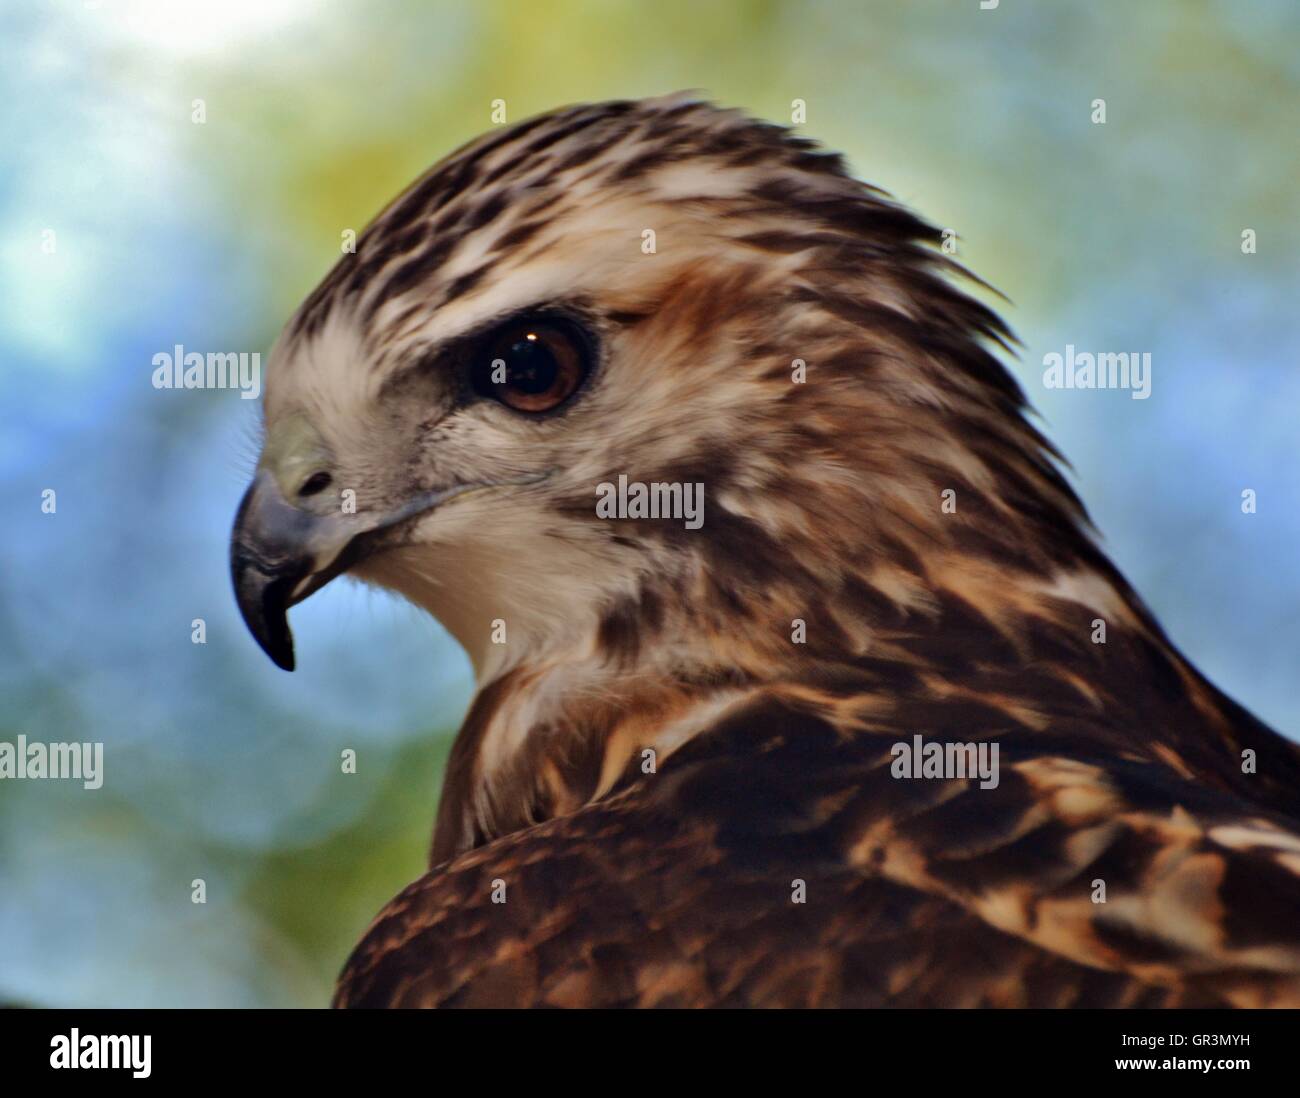 A Red-tailed Hawk (Buteo jamaicensis). The hawk is in the forest, giving a blue and green background Stock Photo